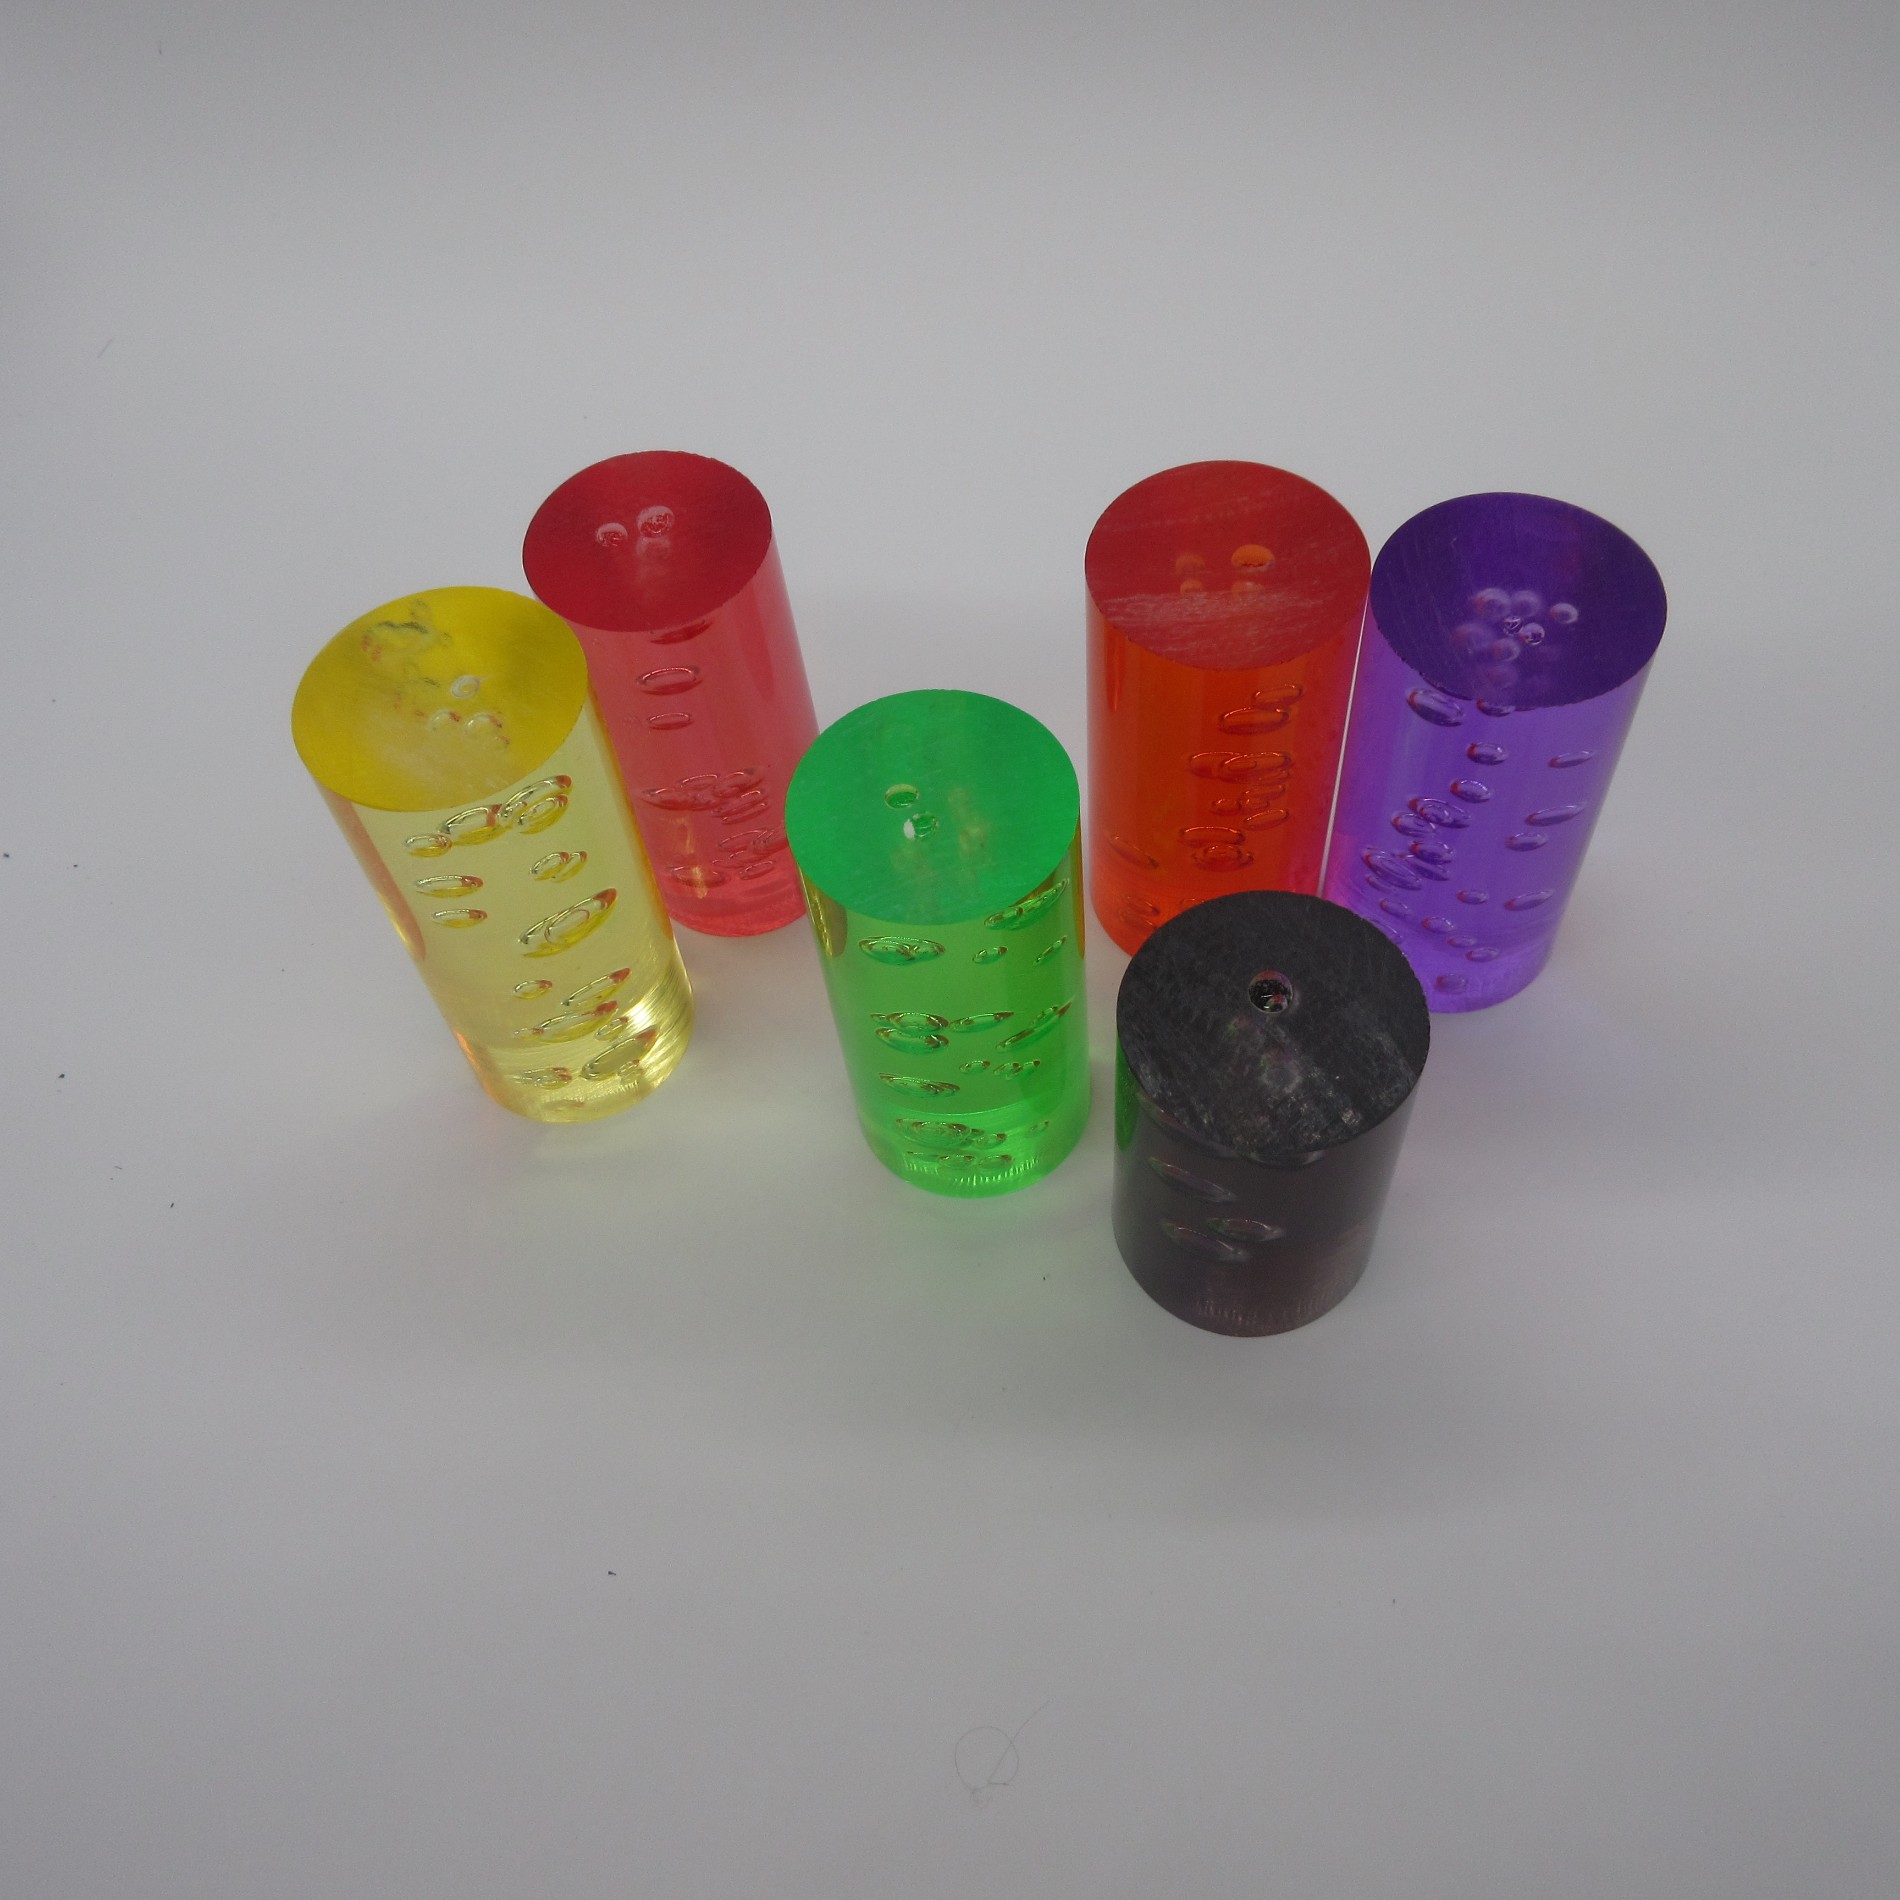 Comprar Colored or transparent round acrylic rod,Colored or transparent round acrylic rod Preço,Colored or transparent round acrylic rod   Marcas,Colored or transparent round acrylic rod Fabricante,Colored or transparent round acrylic rod Mercado,Colored or transparent round acrylic rod Companhia,